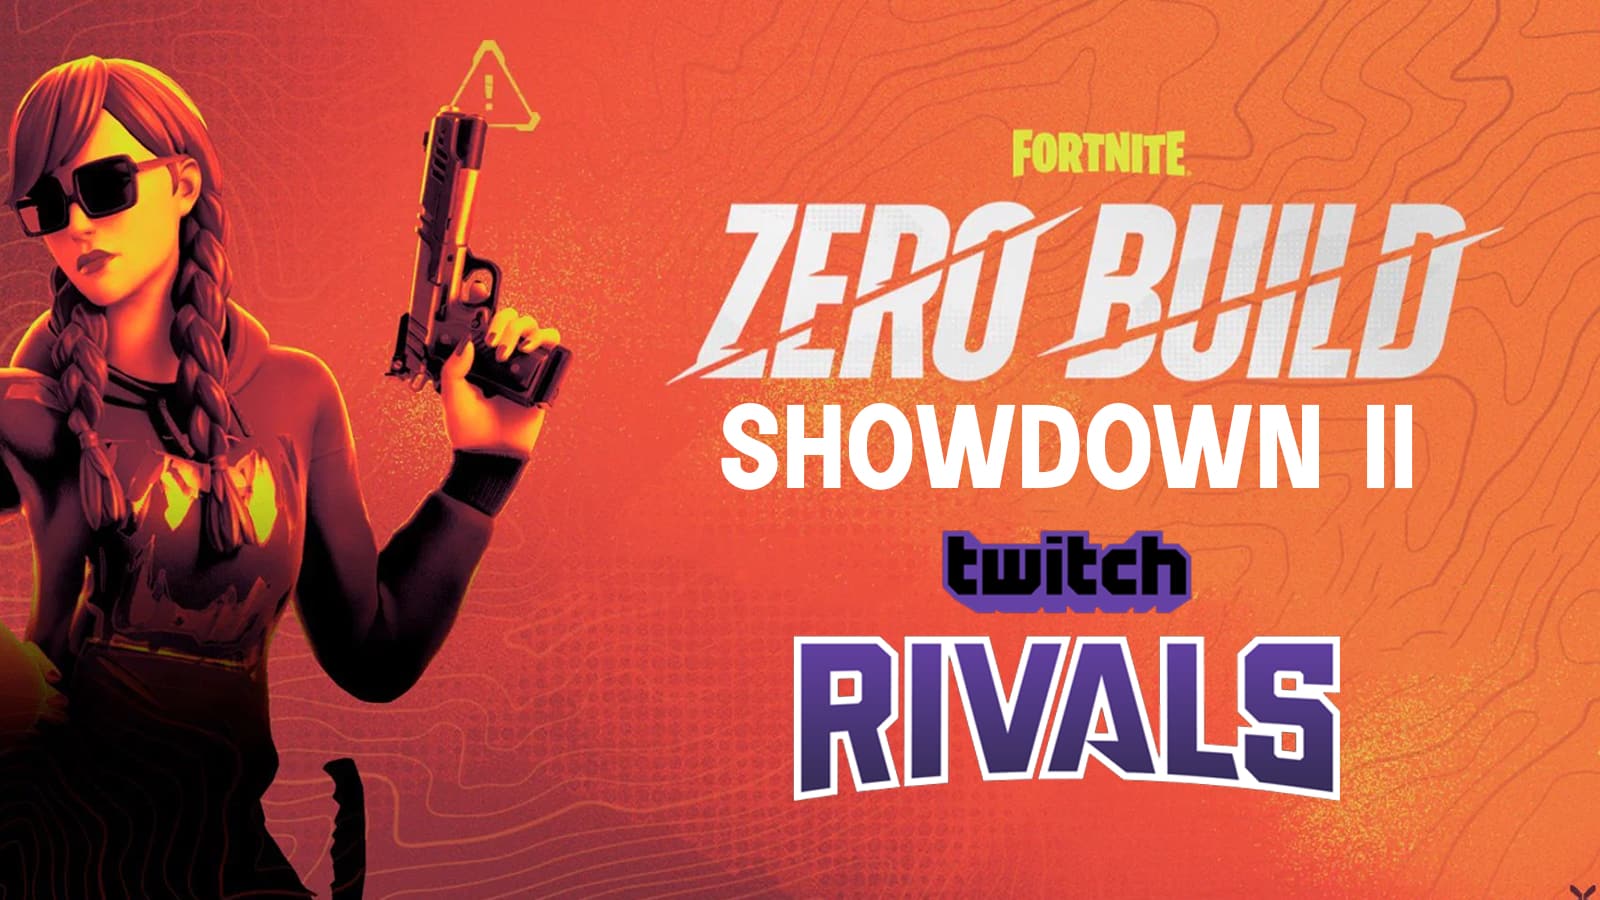 An image of Twitch Rivals Fortnite Showdown 2